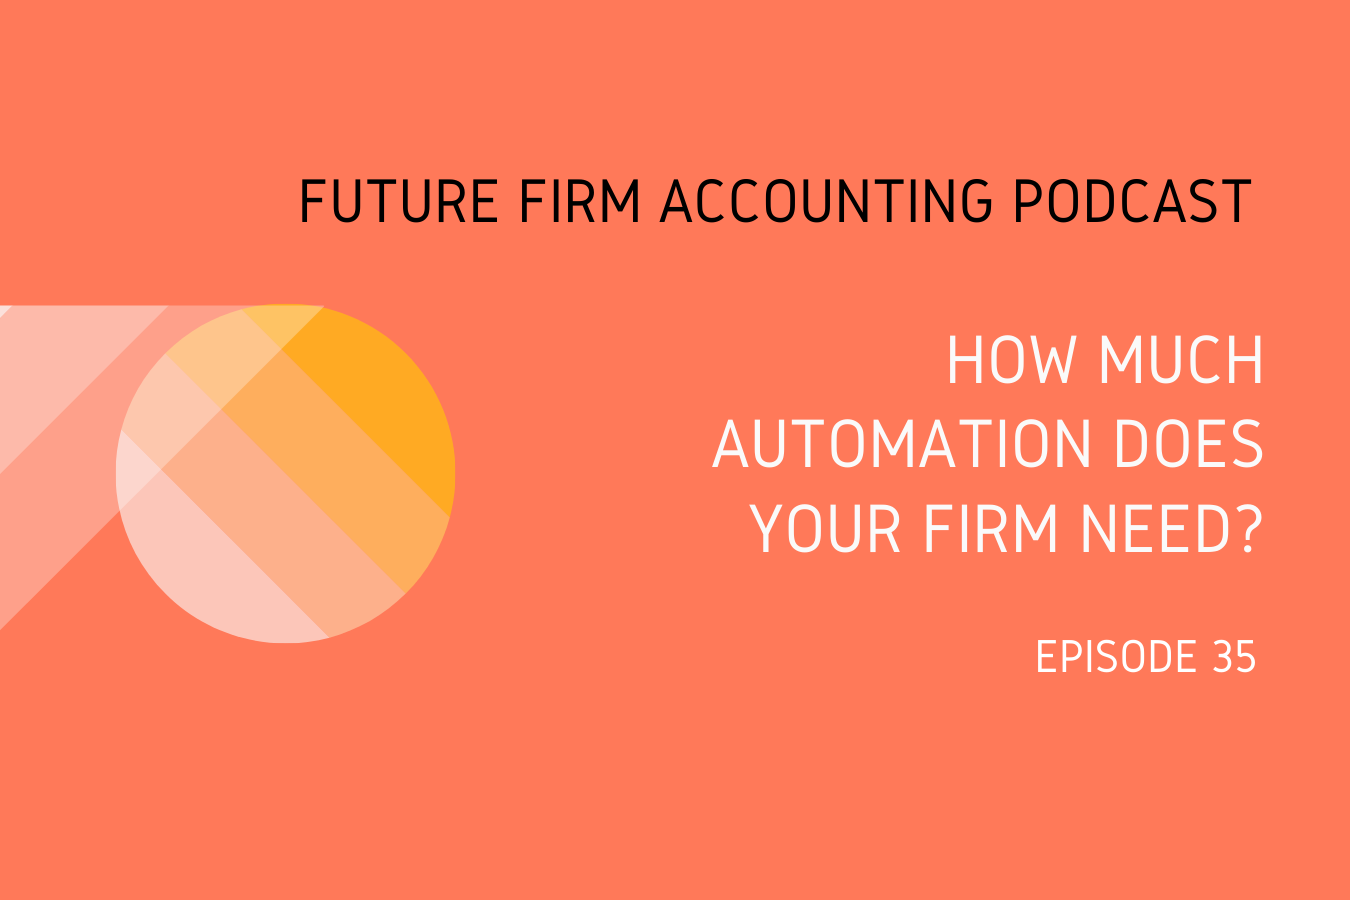 How Much Automation Does Your Firm Need